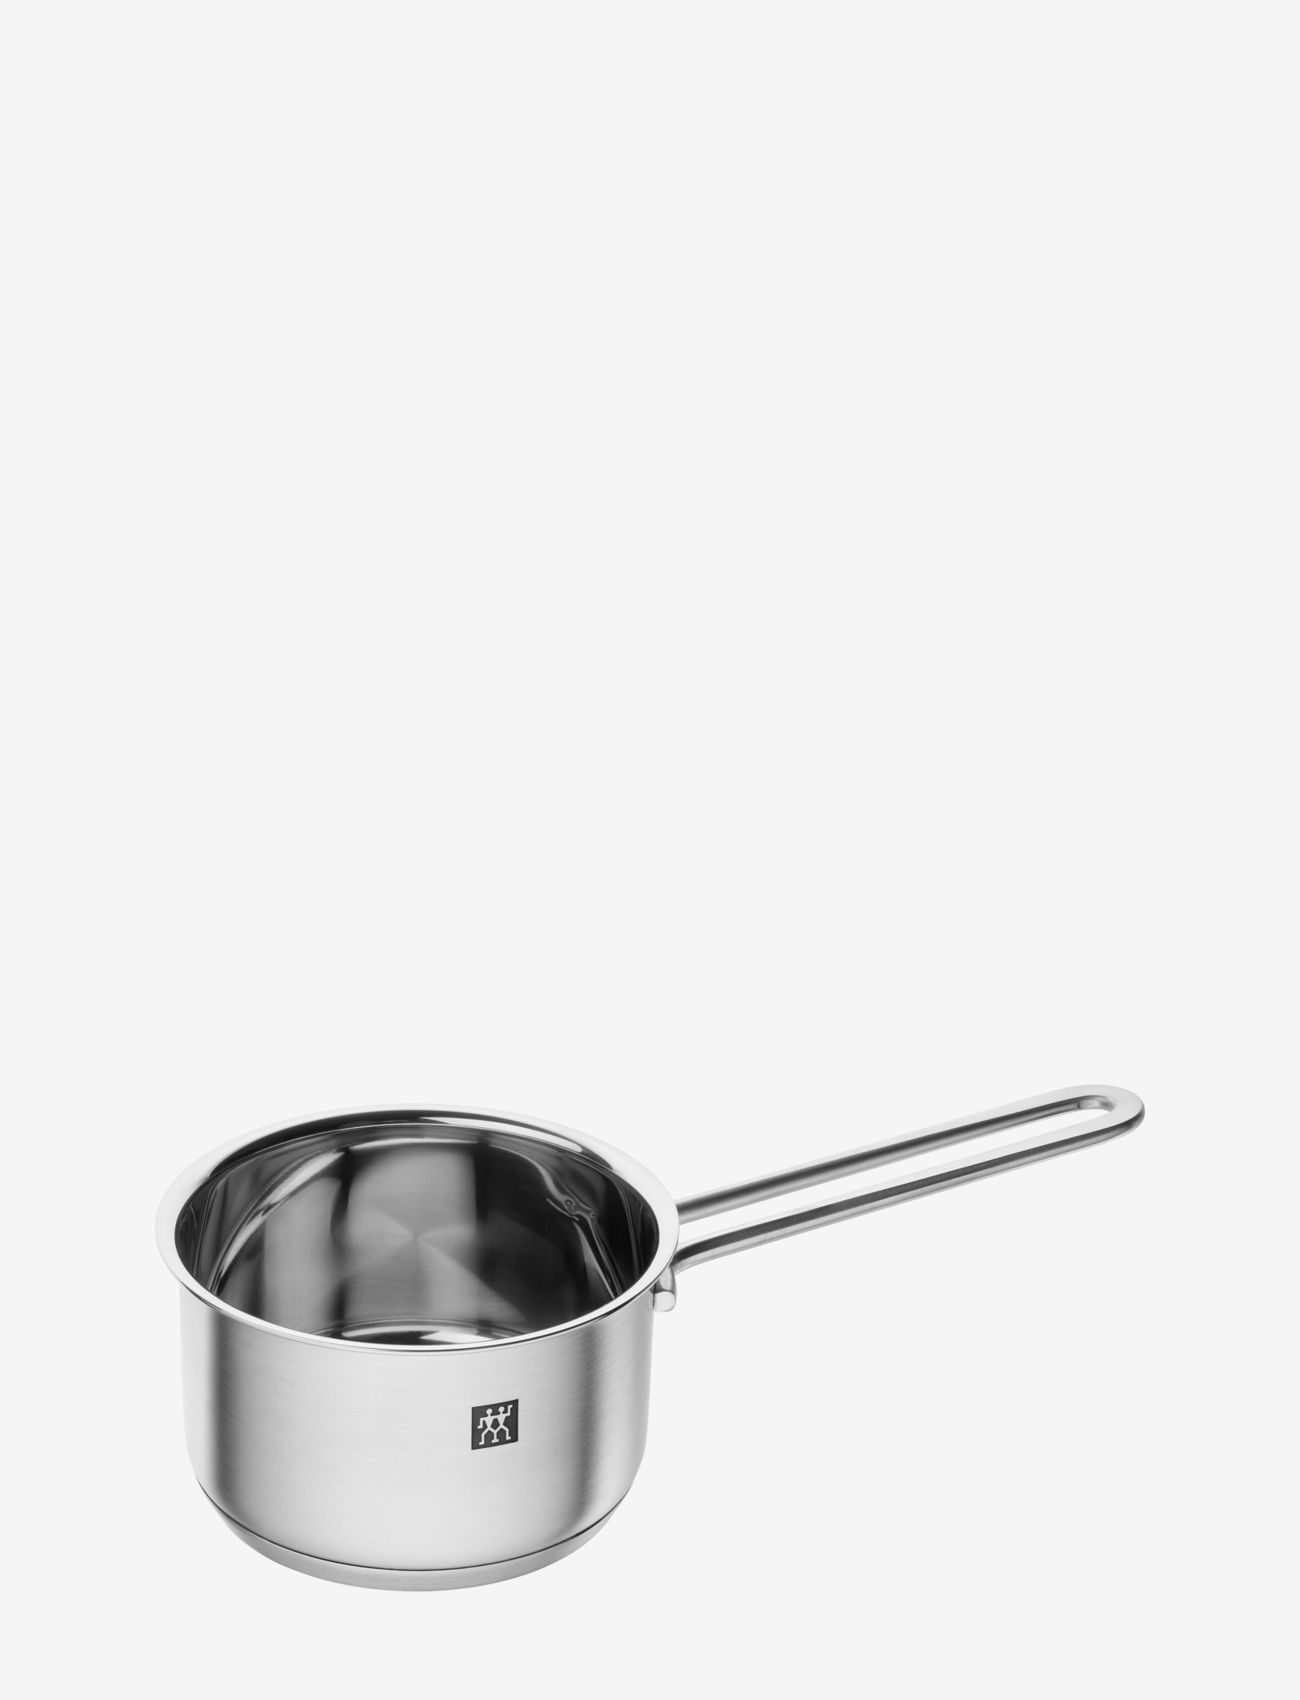 Zwilling - Sauce pan without lid - die niedrigsten preise - silver - 0